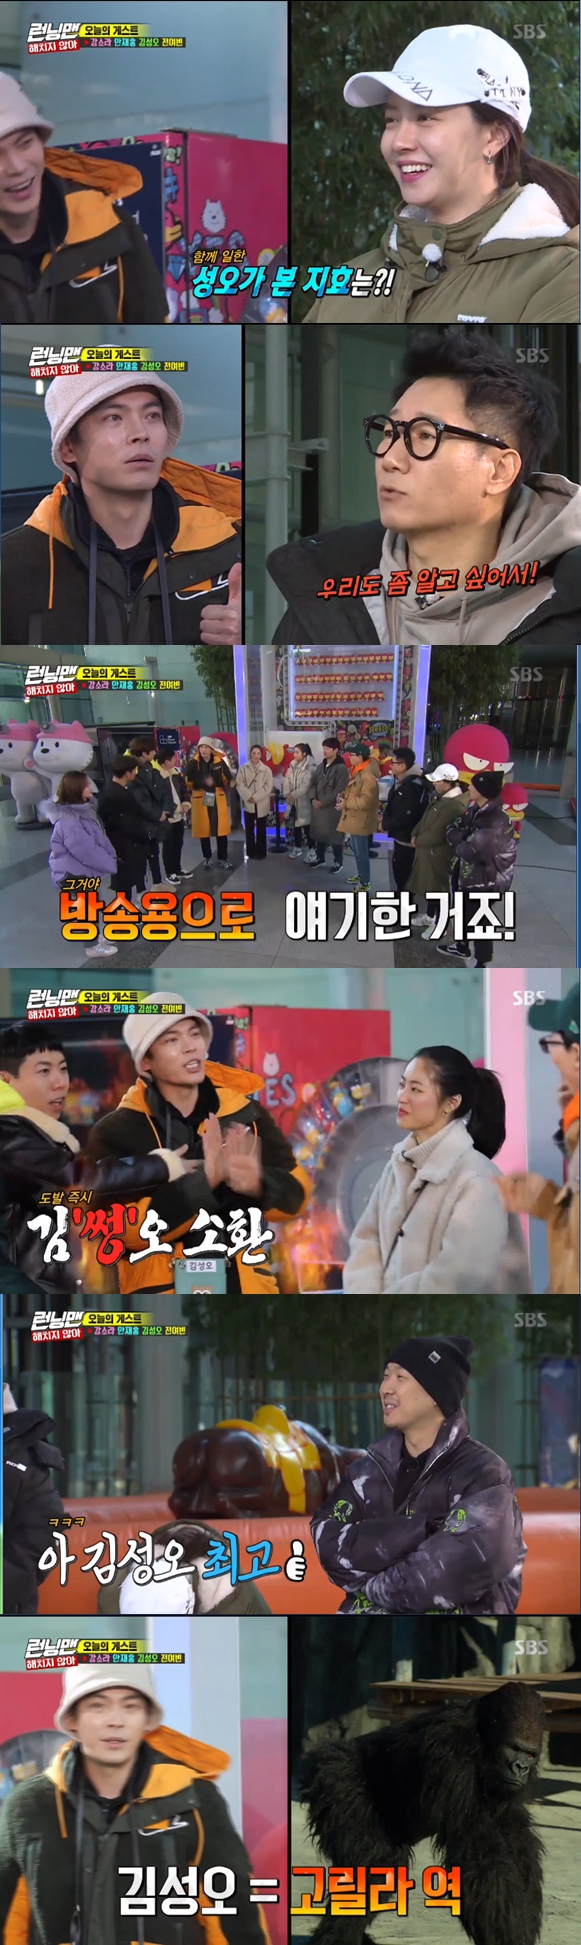 Kim Sung-oh summoned Kim Tae-oh.In the SBS entertainment program Running Man broadcasted on the night of the 12th, Ahn Jae-hong, Kang So-ra, Kim Sung-oh and Jeon Yeo-bin came out as guests and performed I do not hurt race with the members.Although he arrived at the designated pRace as the first prize, Kang So-ra showed no adaptation to the Running Man style.When Yoo Jae-Suk asked, How do you feel about racing? He laughed, saying, I felt a sense of skepticism about human relations.Kim Sung-oh revealed his nature to the members question baptism. Ji Suk-jin asked Kim Sung-oh what he thought about Song Ji-hyo, who appeared in the same work.However, when the members asked me to know what part was good, he said, I talked about it for broadcasting. I also broadcast it privately.